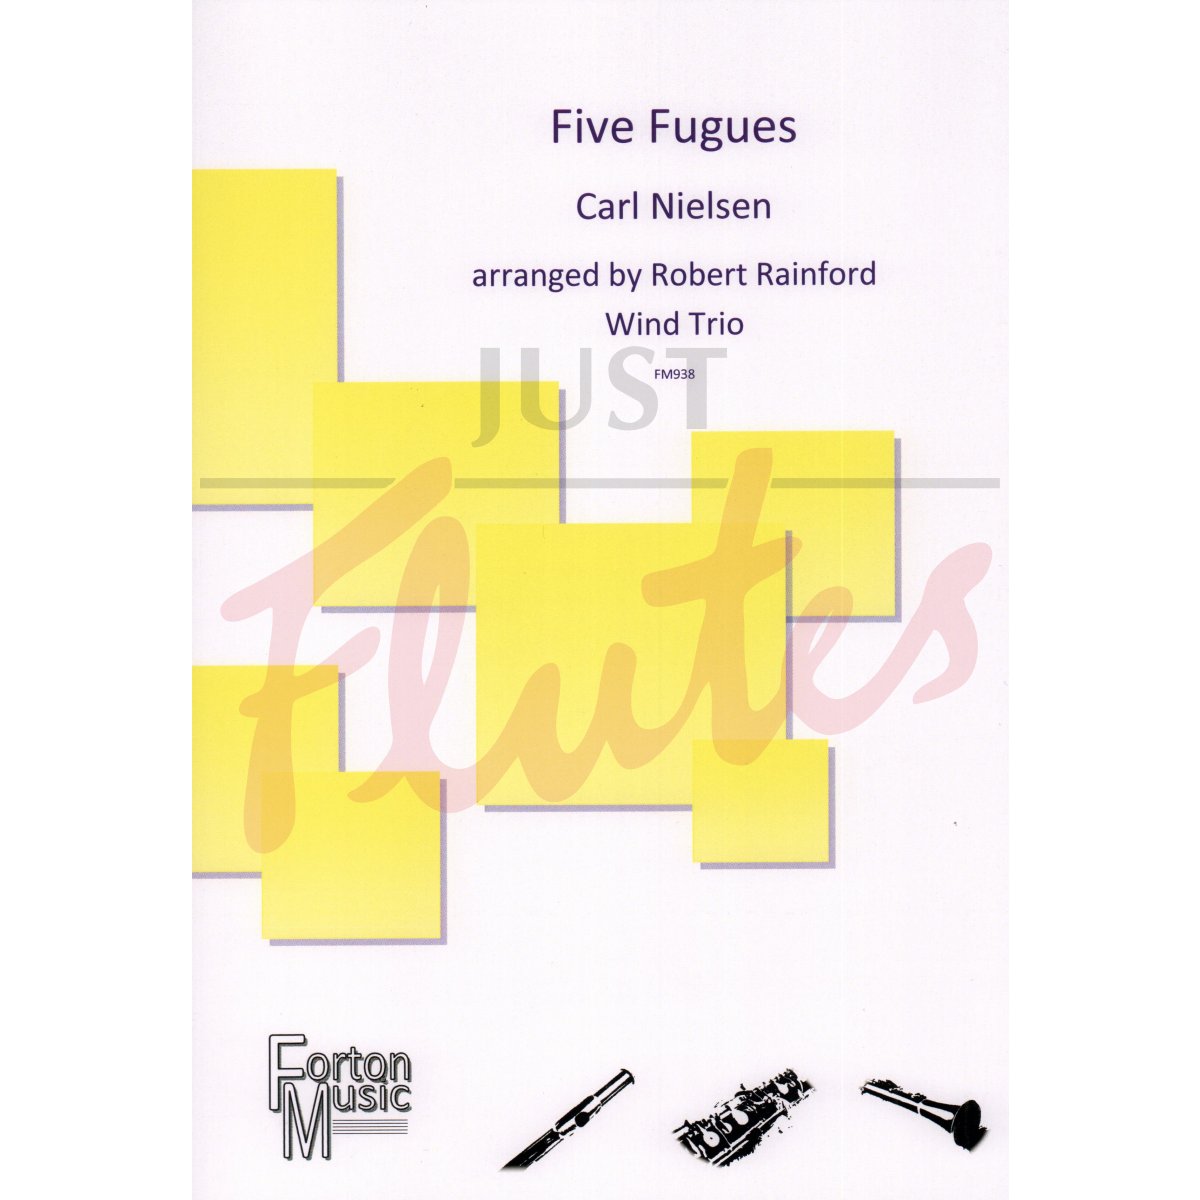 Five Fugues for Wind Trio